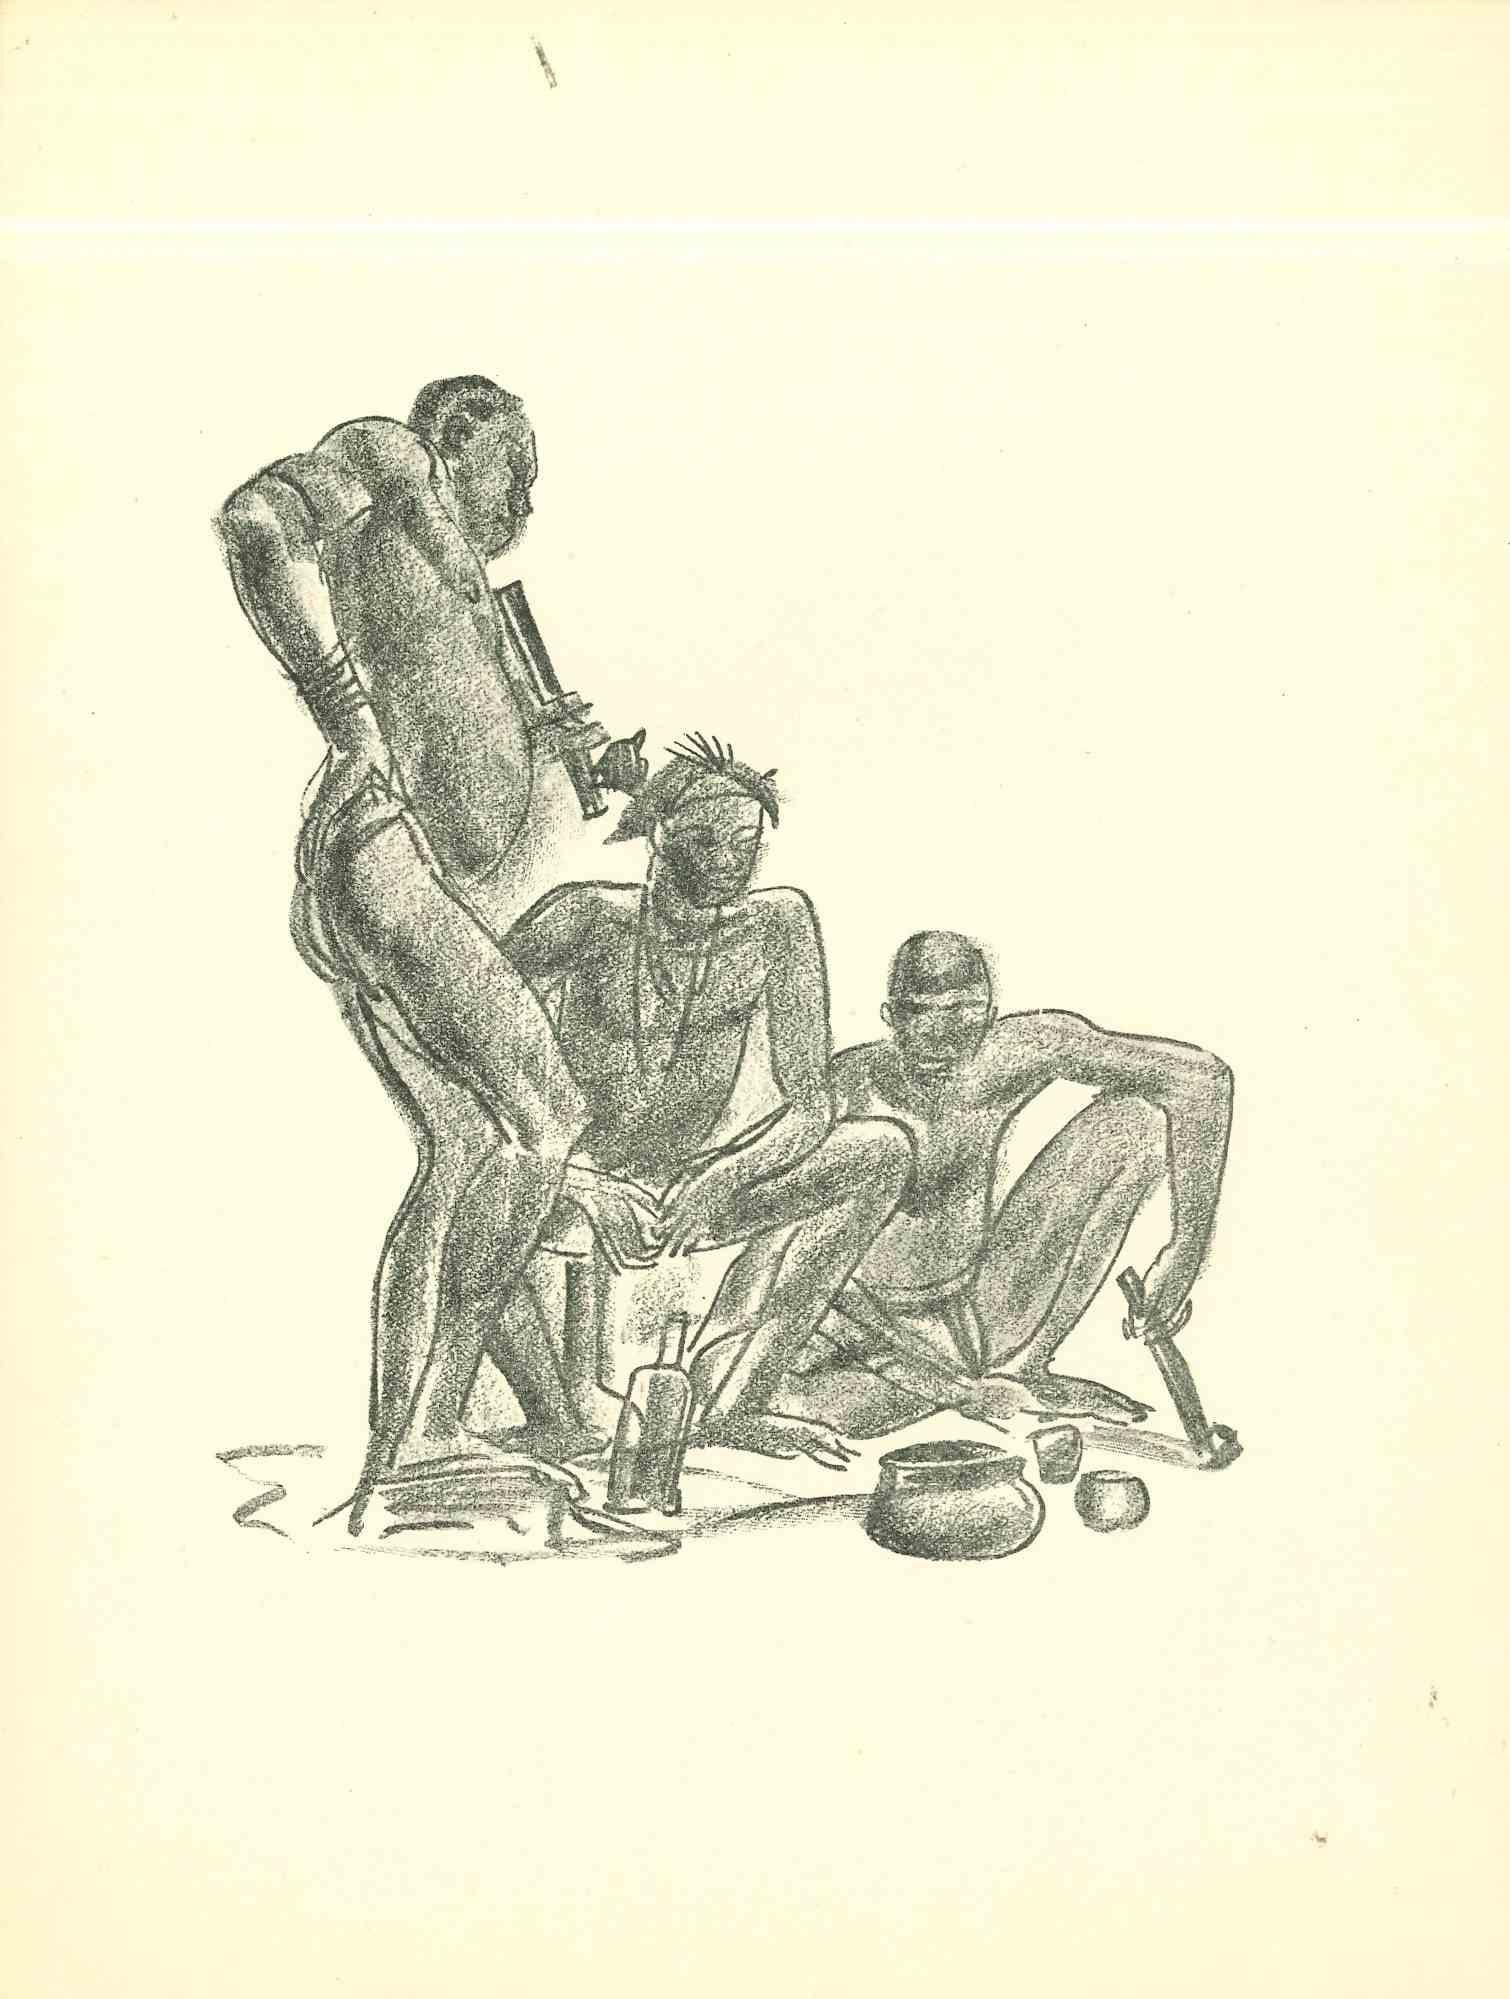 Gathering is an original lithograph realized in the early 1930s by Emmanuel Gondouin, (Versailles, 1883 - Parigi, 1934) 
 
The artwork is depicted through strong strokes and is part of a series entitled "Africa". 
 
 
Emmanuel Gondouin is a French